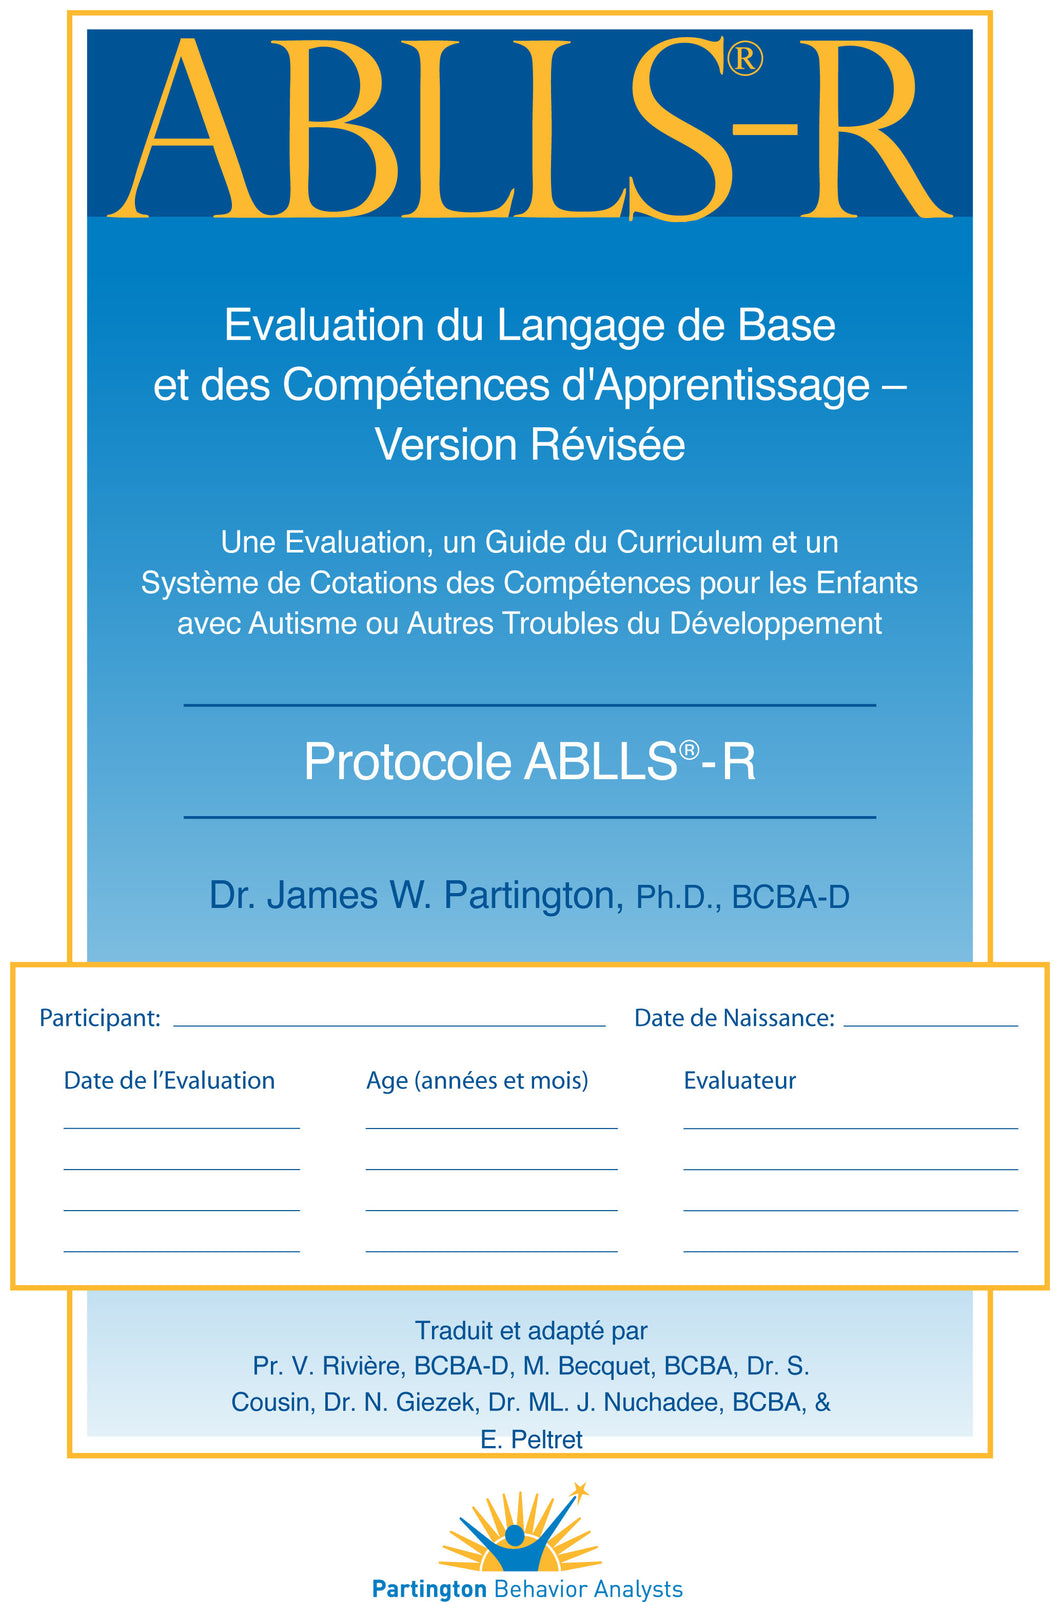 French ABLLS-R Protocol